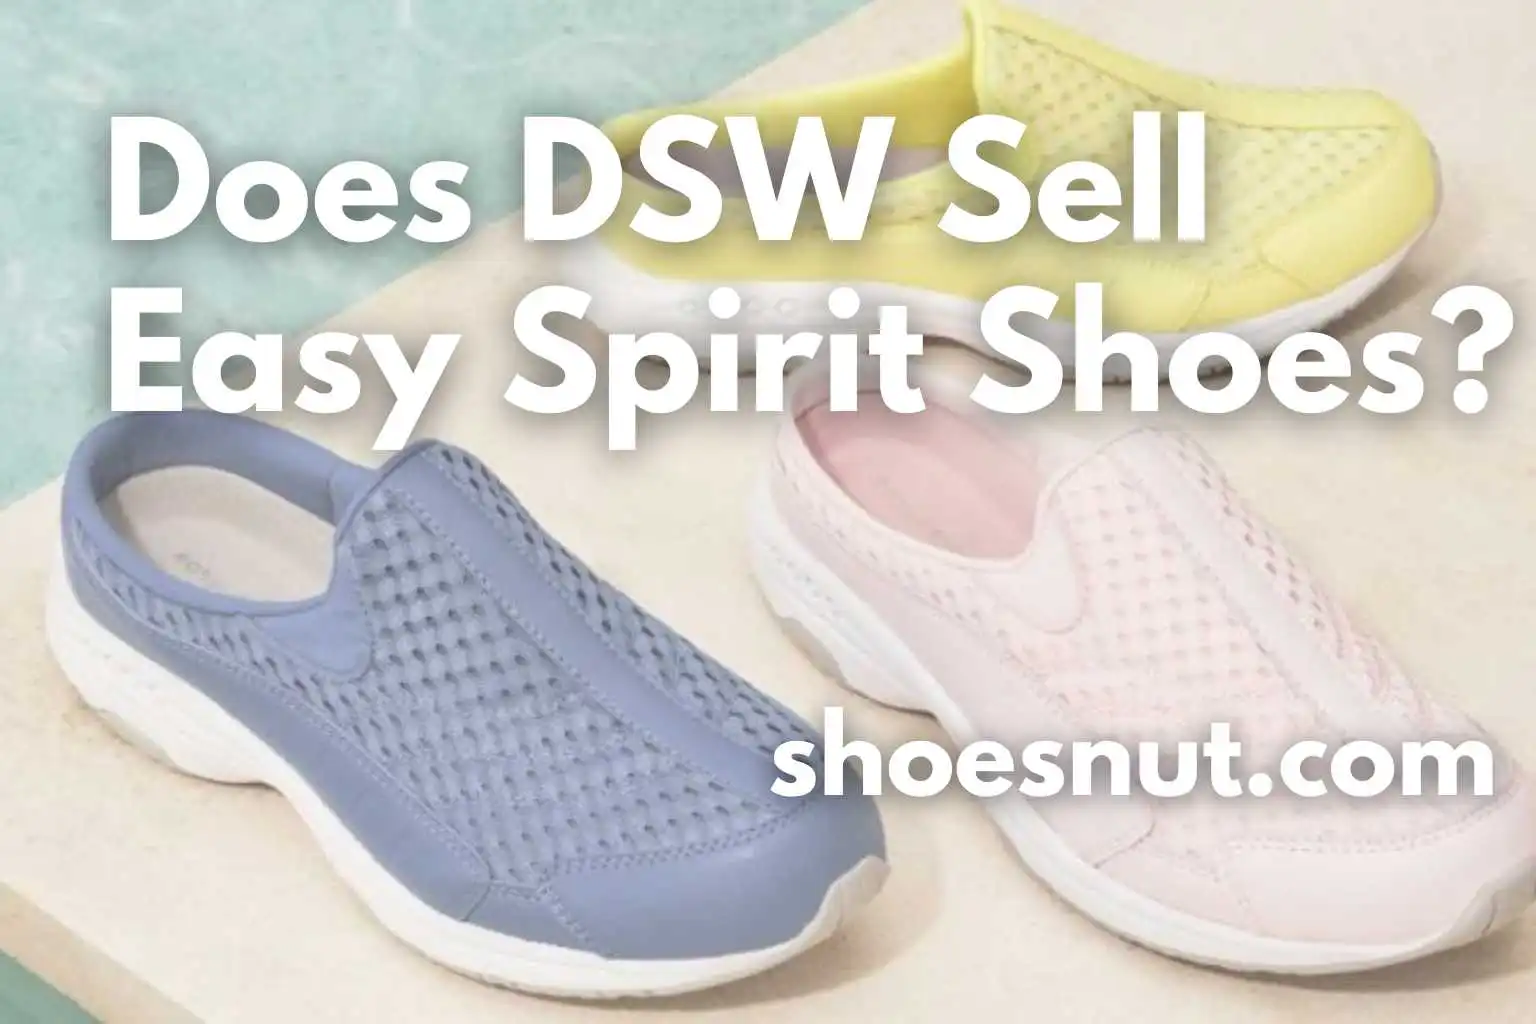 Does DSW Sell Easy Spirit Shoes?